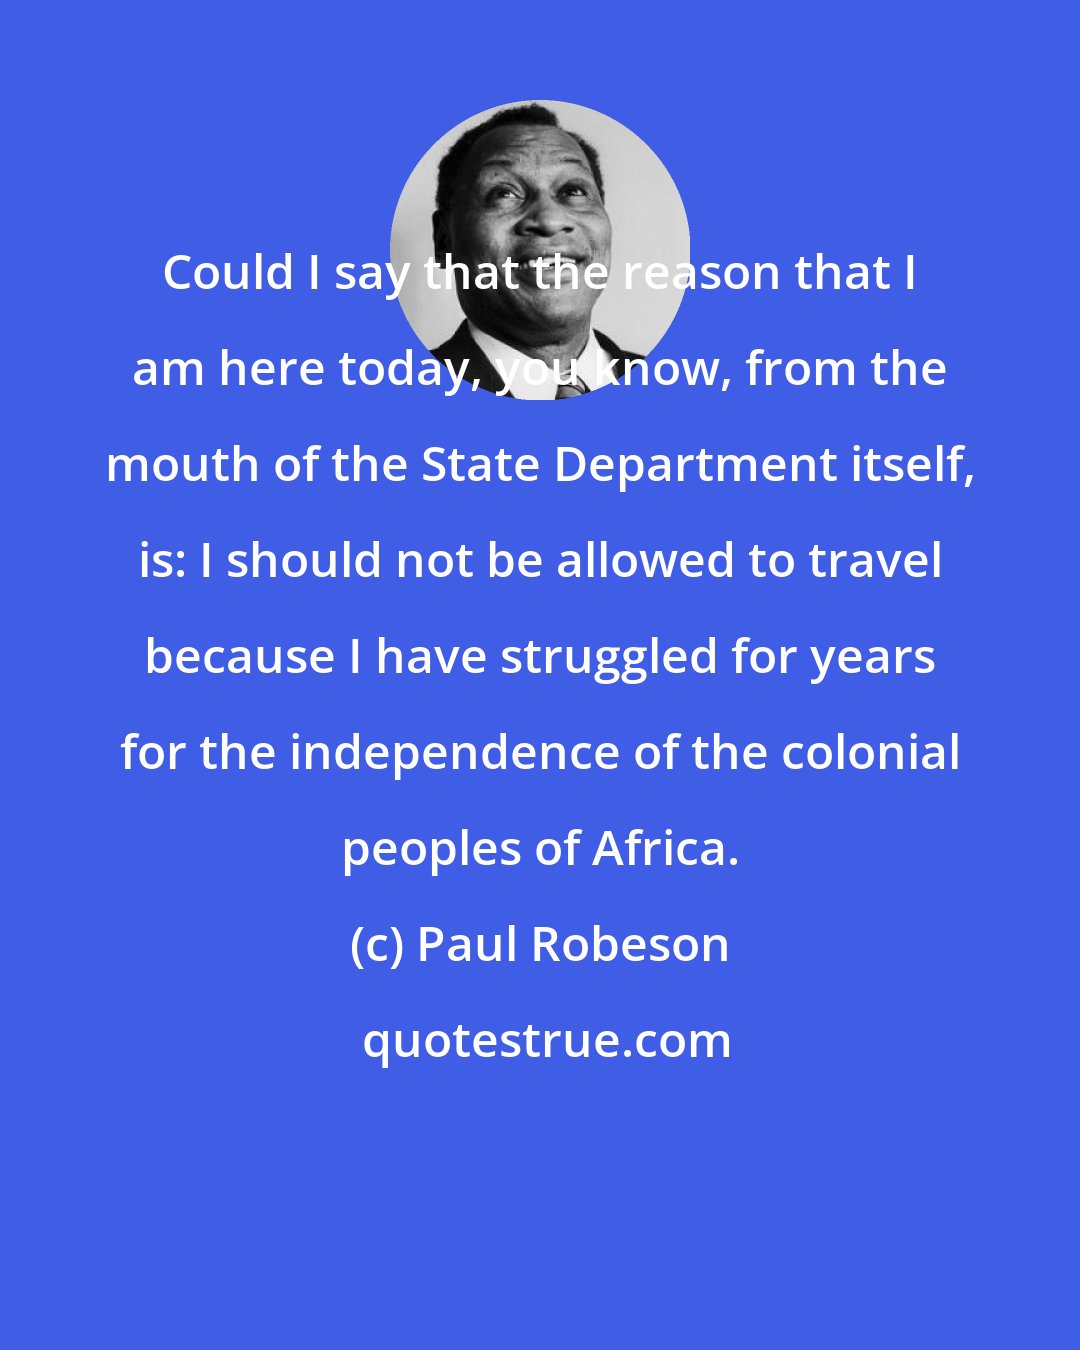 Paul Robeson: Could I say that the reason that I am here today, you know, from the mouth of the State Department itself, is: I should not be allowed to travel because I have struggled for years for the independence of the colonial peoples of Africa.